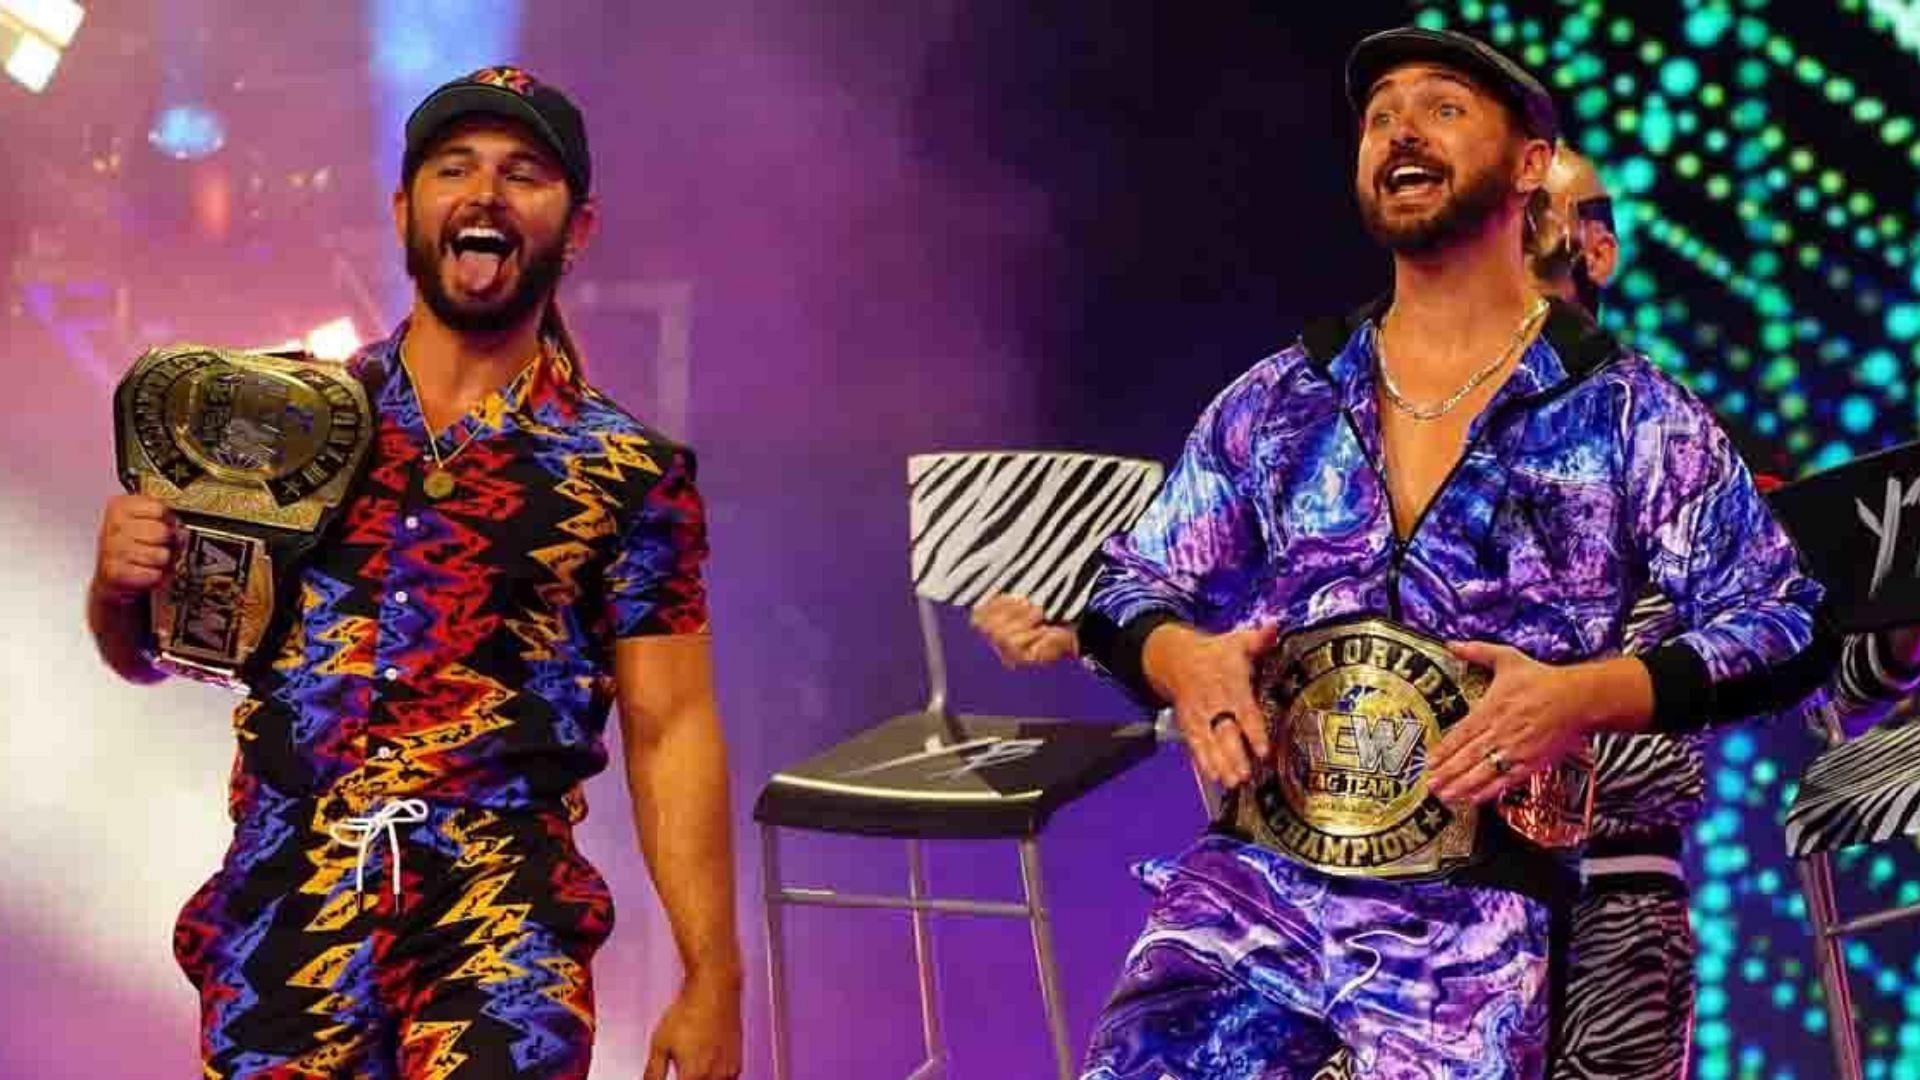 The Young Bucks are the former AEW tag team Champion